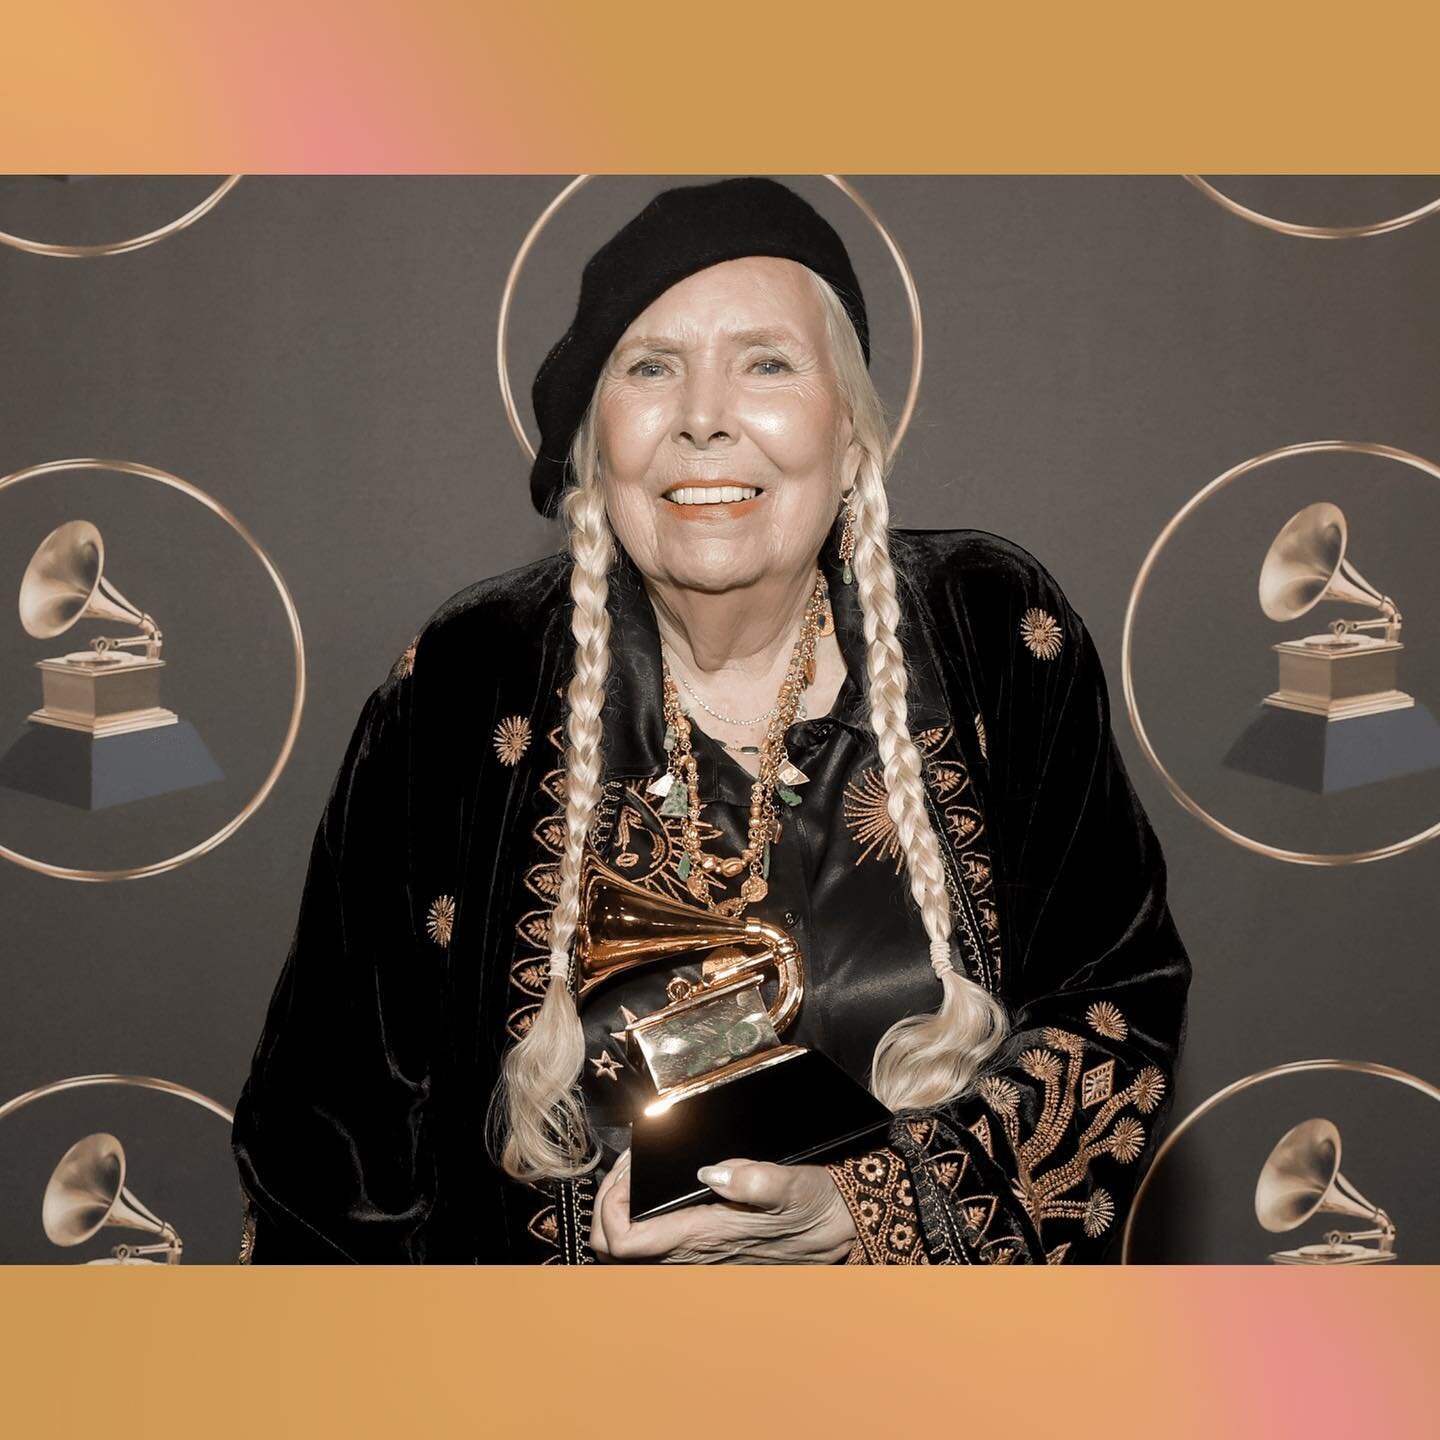 Congrats to @jonimitchell 🏆 for winning Best Folk Album at Newport [Live] at the 66th Annual GRAMMY Awards!
Joni has been nominated 18 times and has won 10 GRAMMY&rsquo;s. 
Singer-Songwriter, multi-instrumentalist, and painter, Joni has been perform